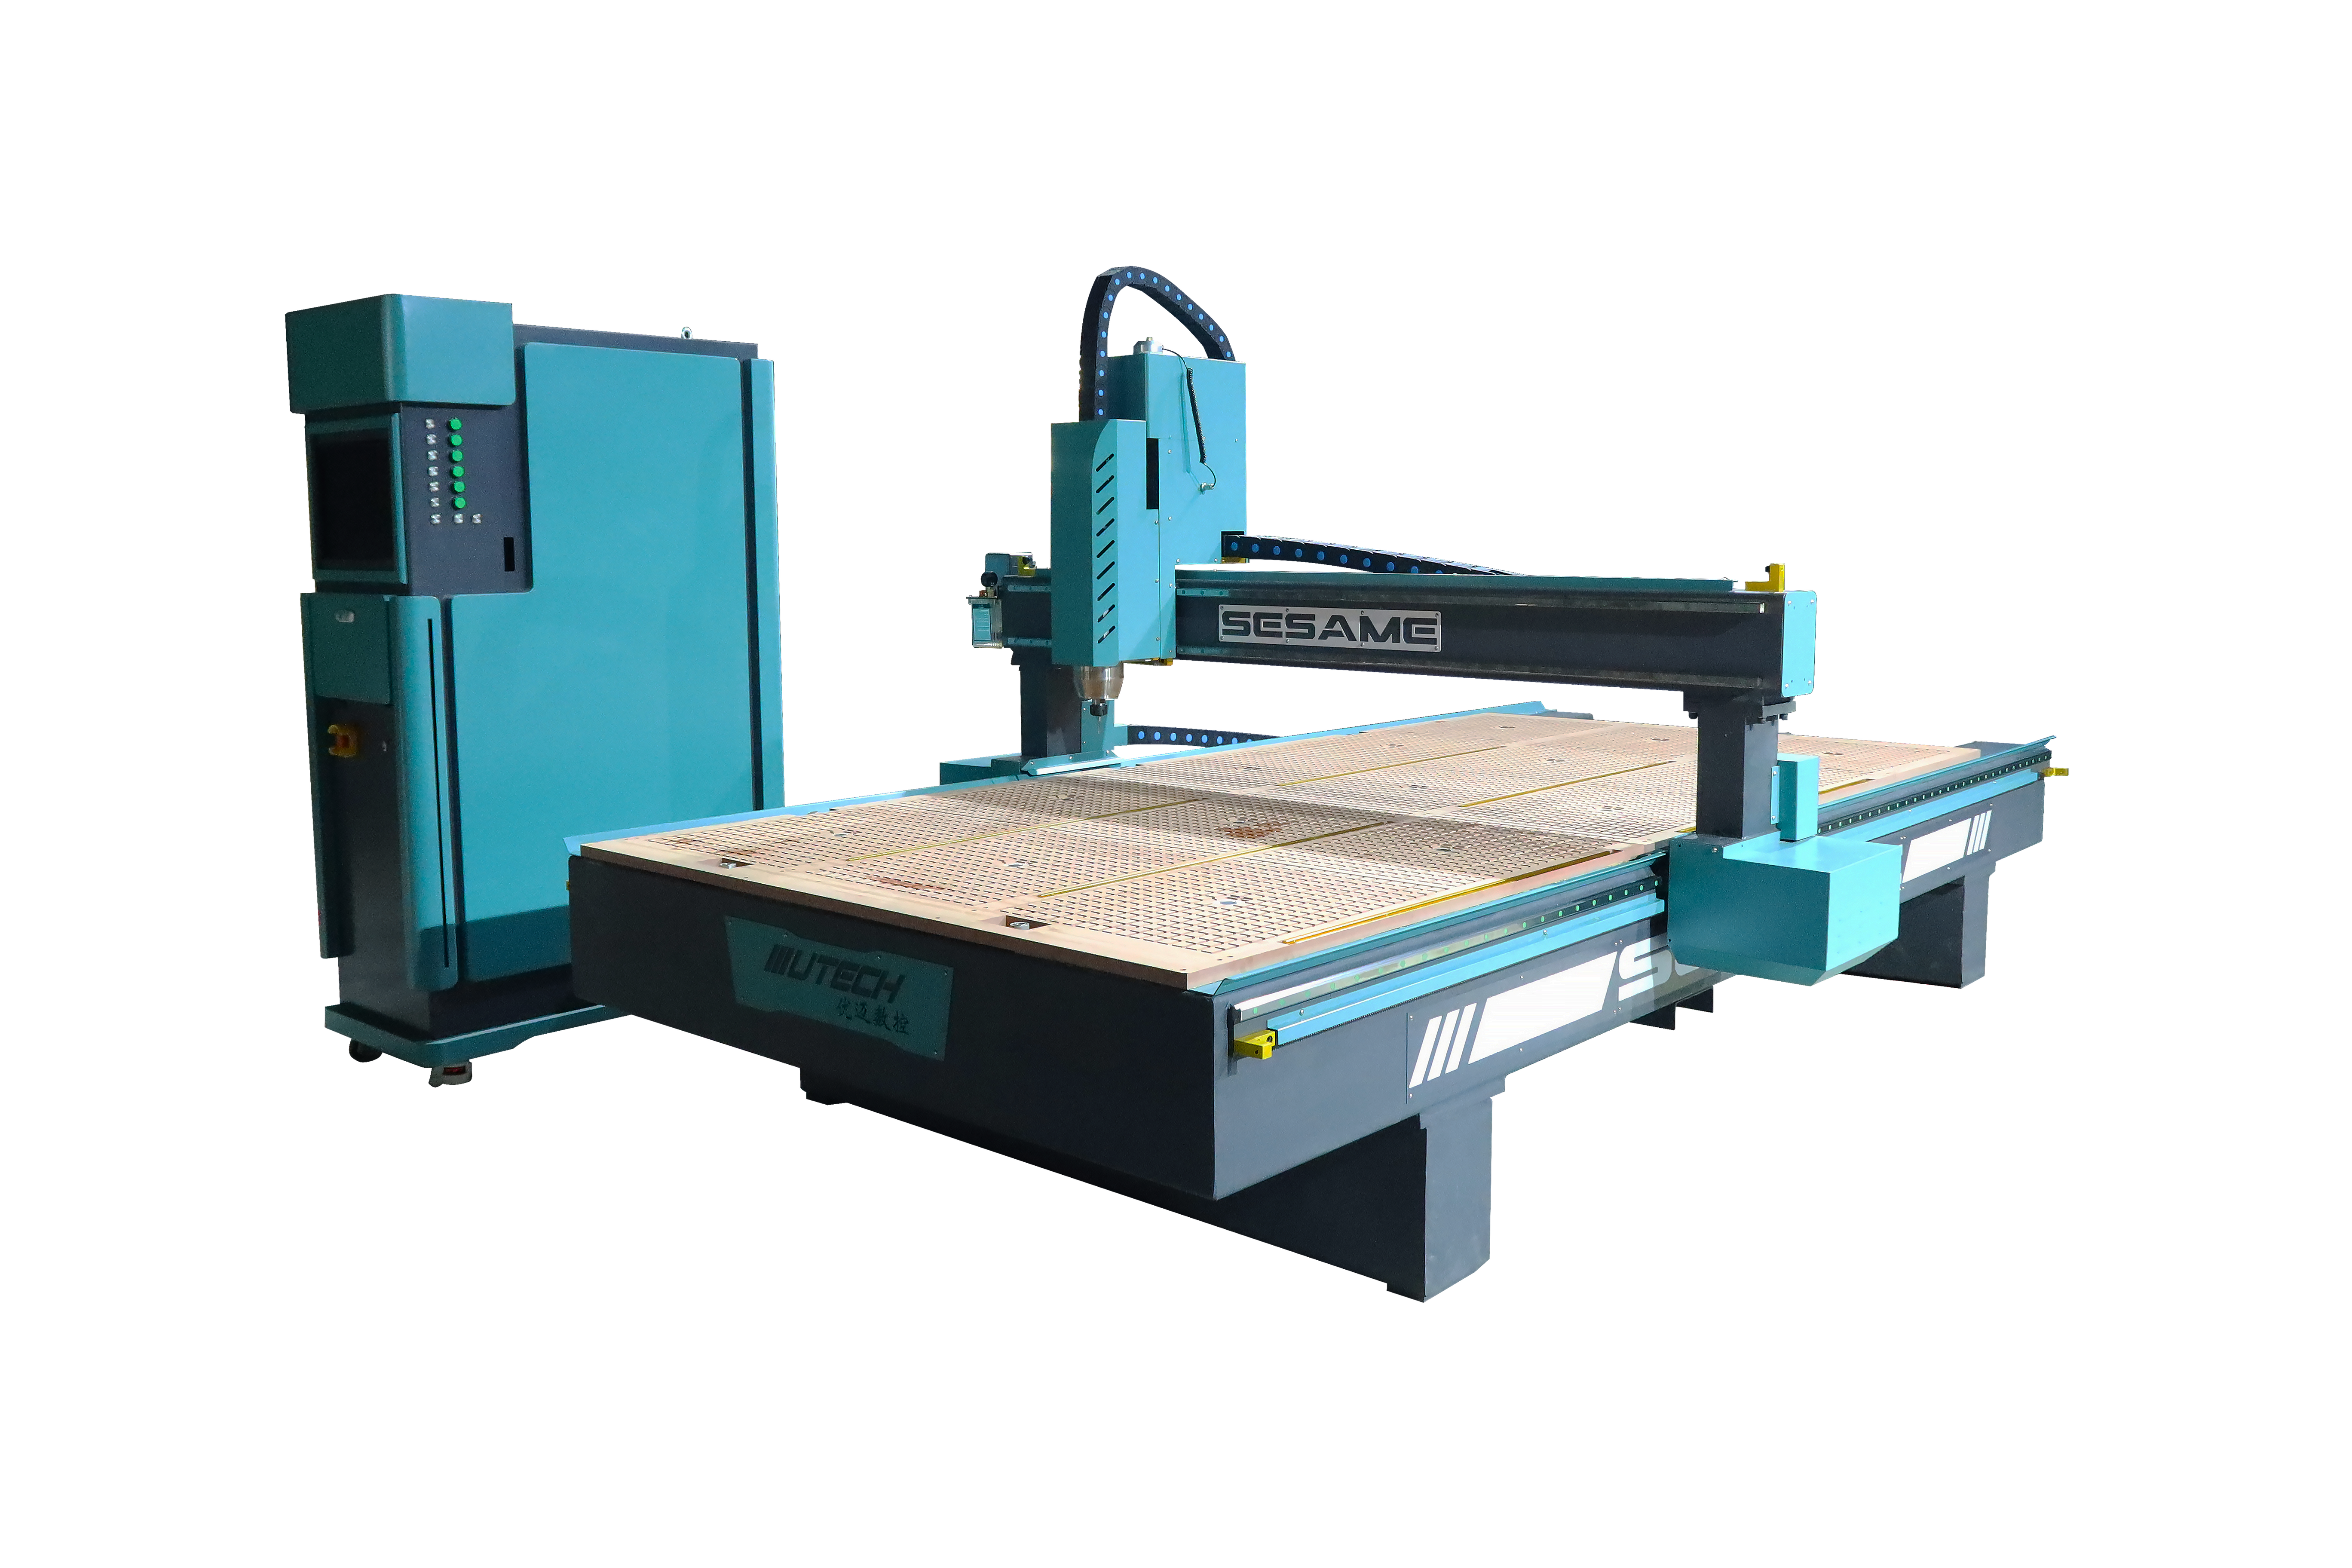 UTECH 4*8 Ft CNC Router 1325 CNC Woodworking Machine for Furniture